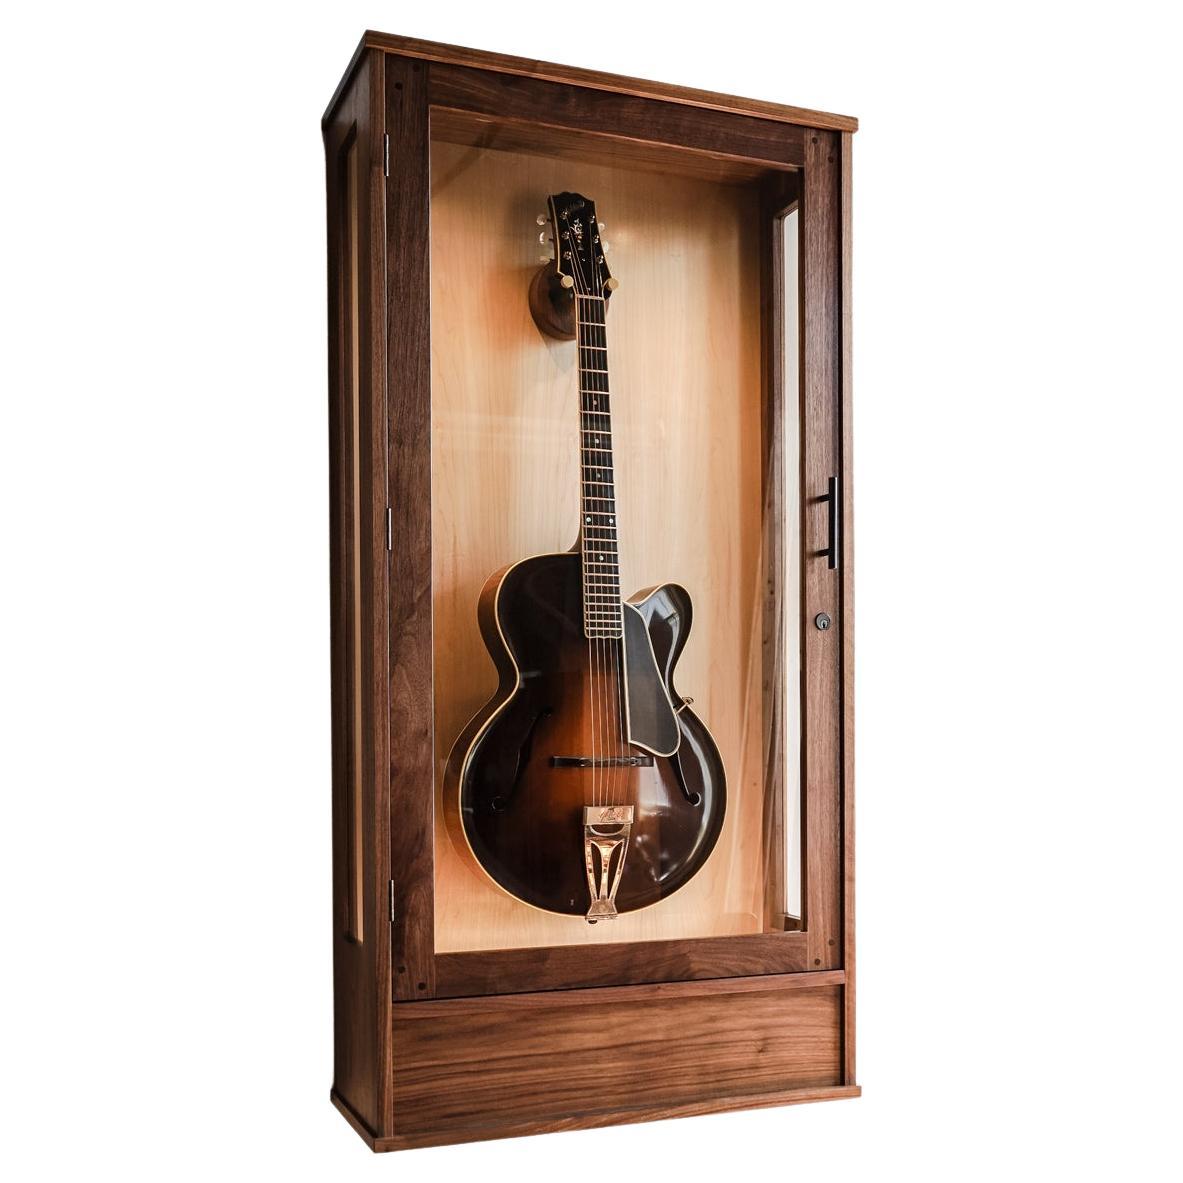 Guitar Humidor, Wall-Mount Display Case, Handcrafted in America - The Nashville For Sale